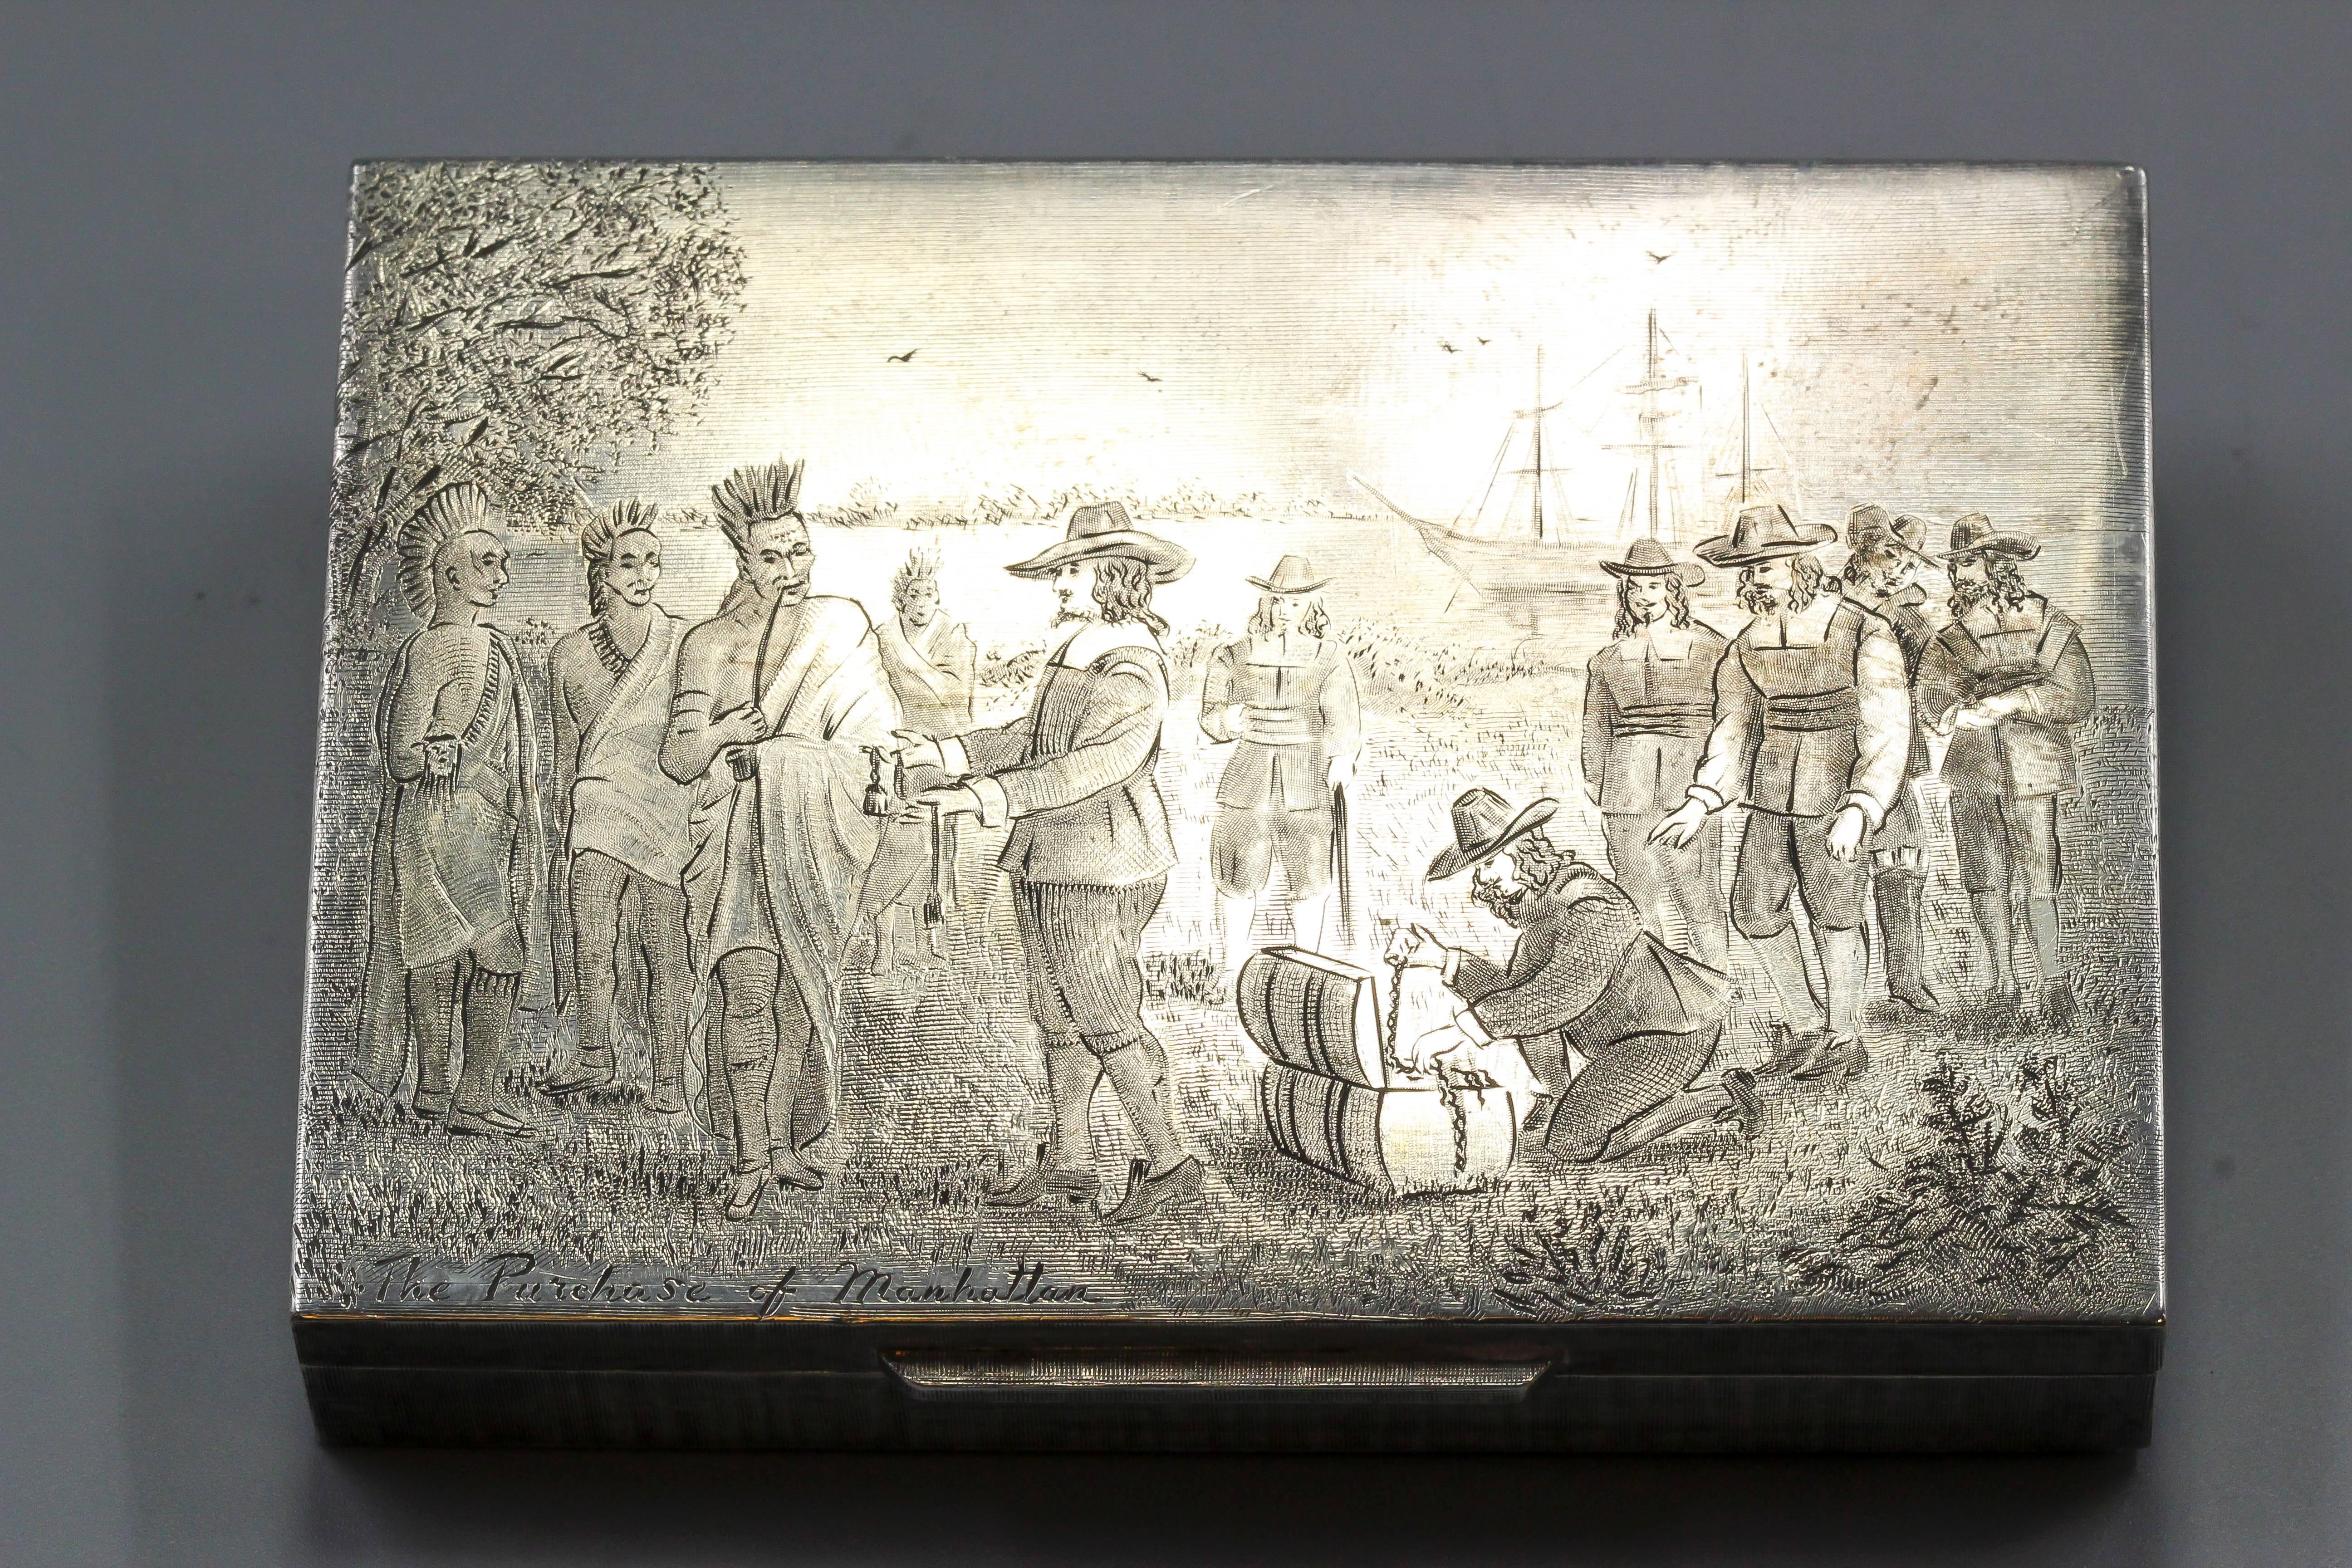 Highly ornate and unusual sterling silver box by Mario Buccellati, circa 1950s, depicting a scene on the front entitled 